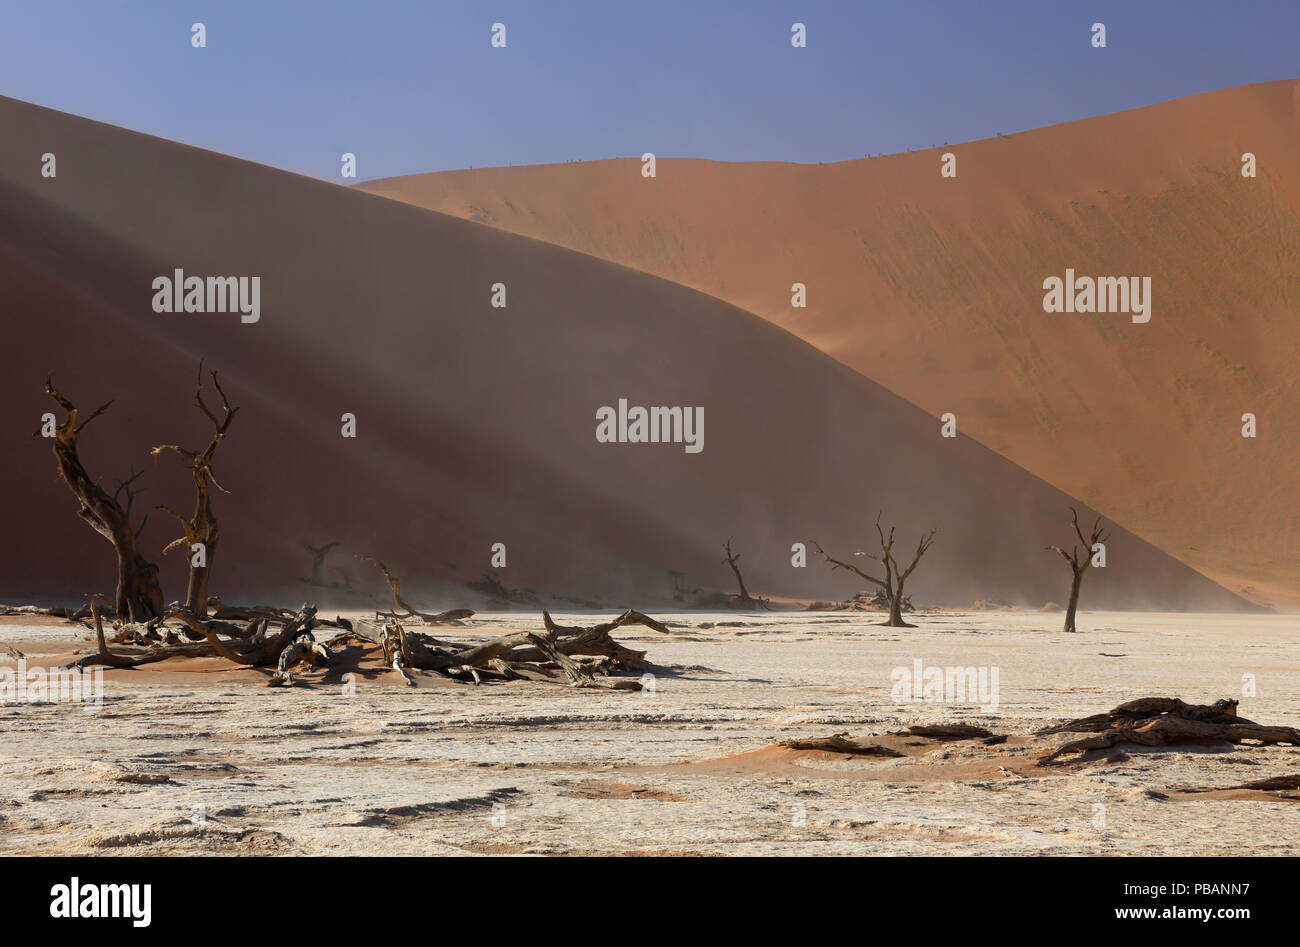 Ancient camel thorn trees (Acacia erioloba) at Deadvlei, Namibia, with Big Daddy, at 325m, the highest sand dune in the world. Stock Photo